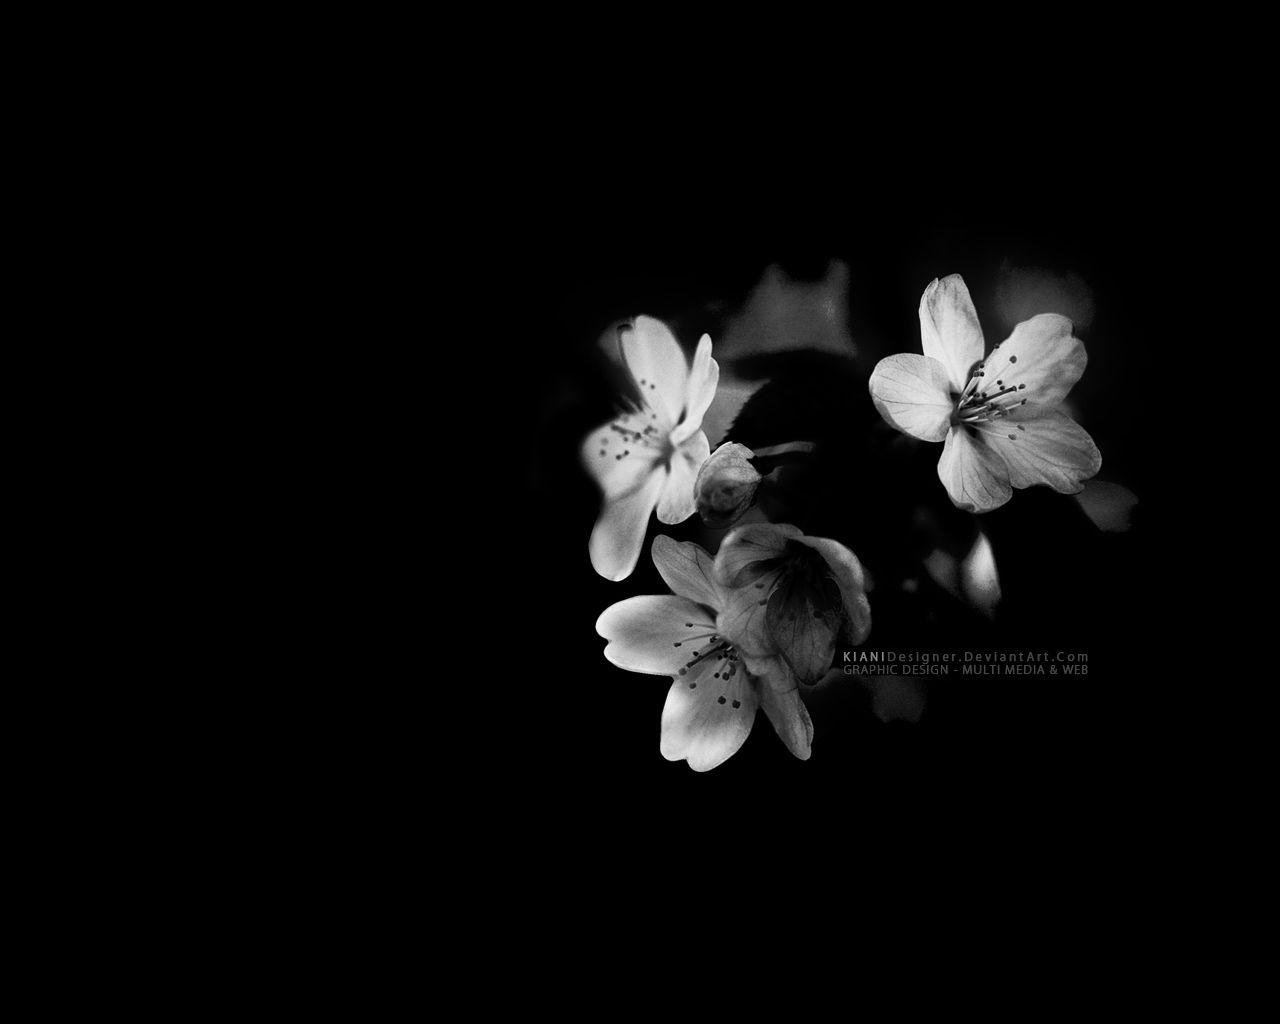 Black And White Flowers Wallpapers 16 Wide Wallpapers